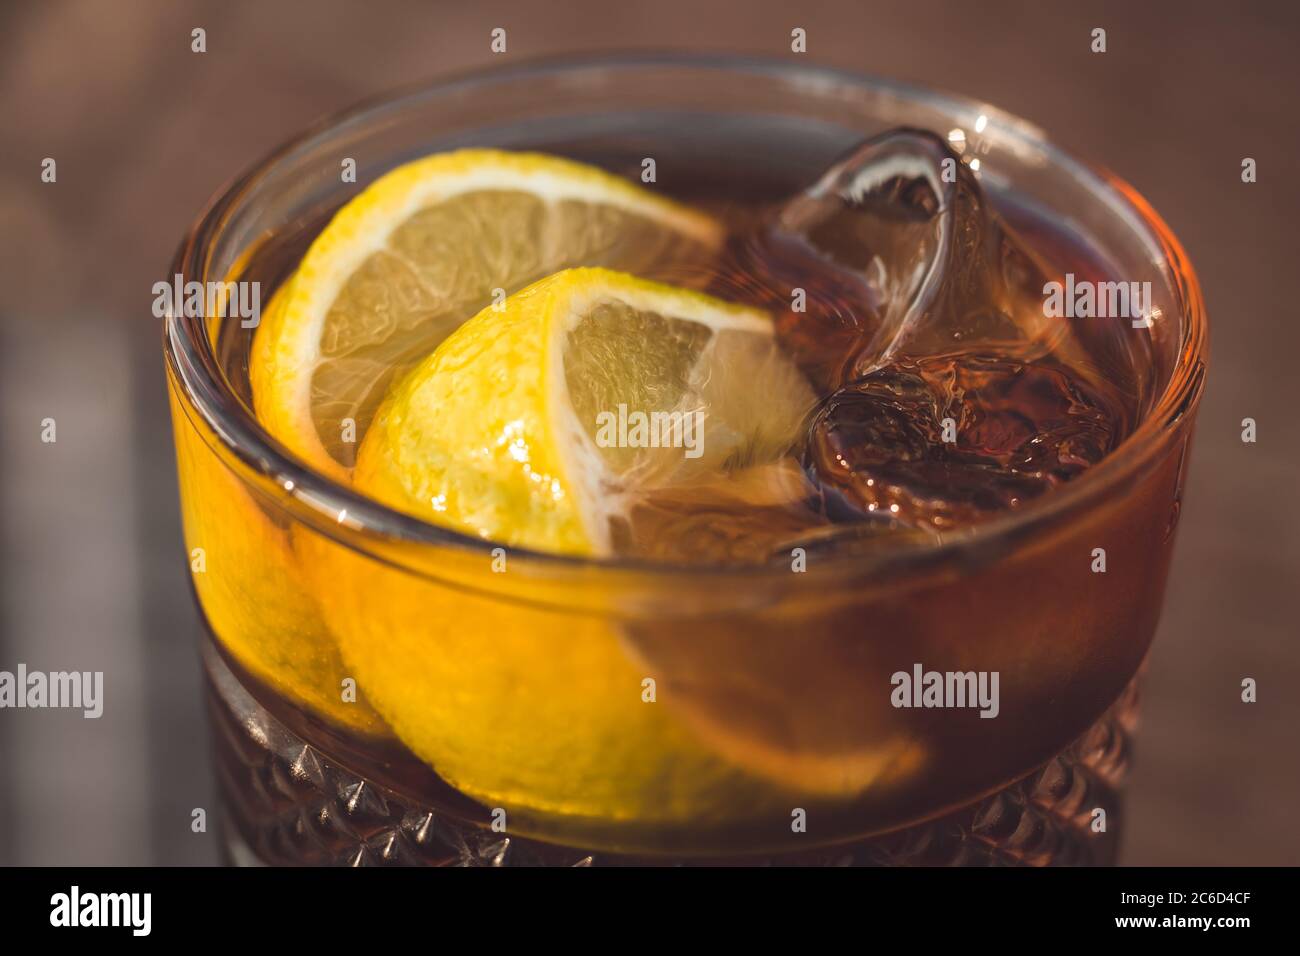 Glass of Long Island iced tea with lemon slice and straw. Close-up of an amber-colored alcoholic drink with ice on table in a bar, cafe Stock Photo